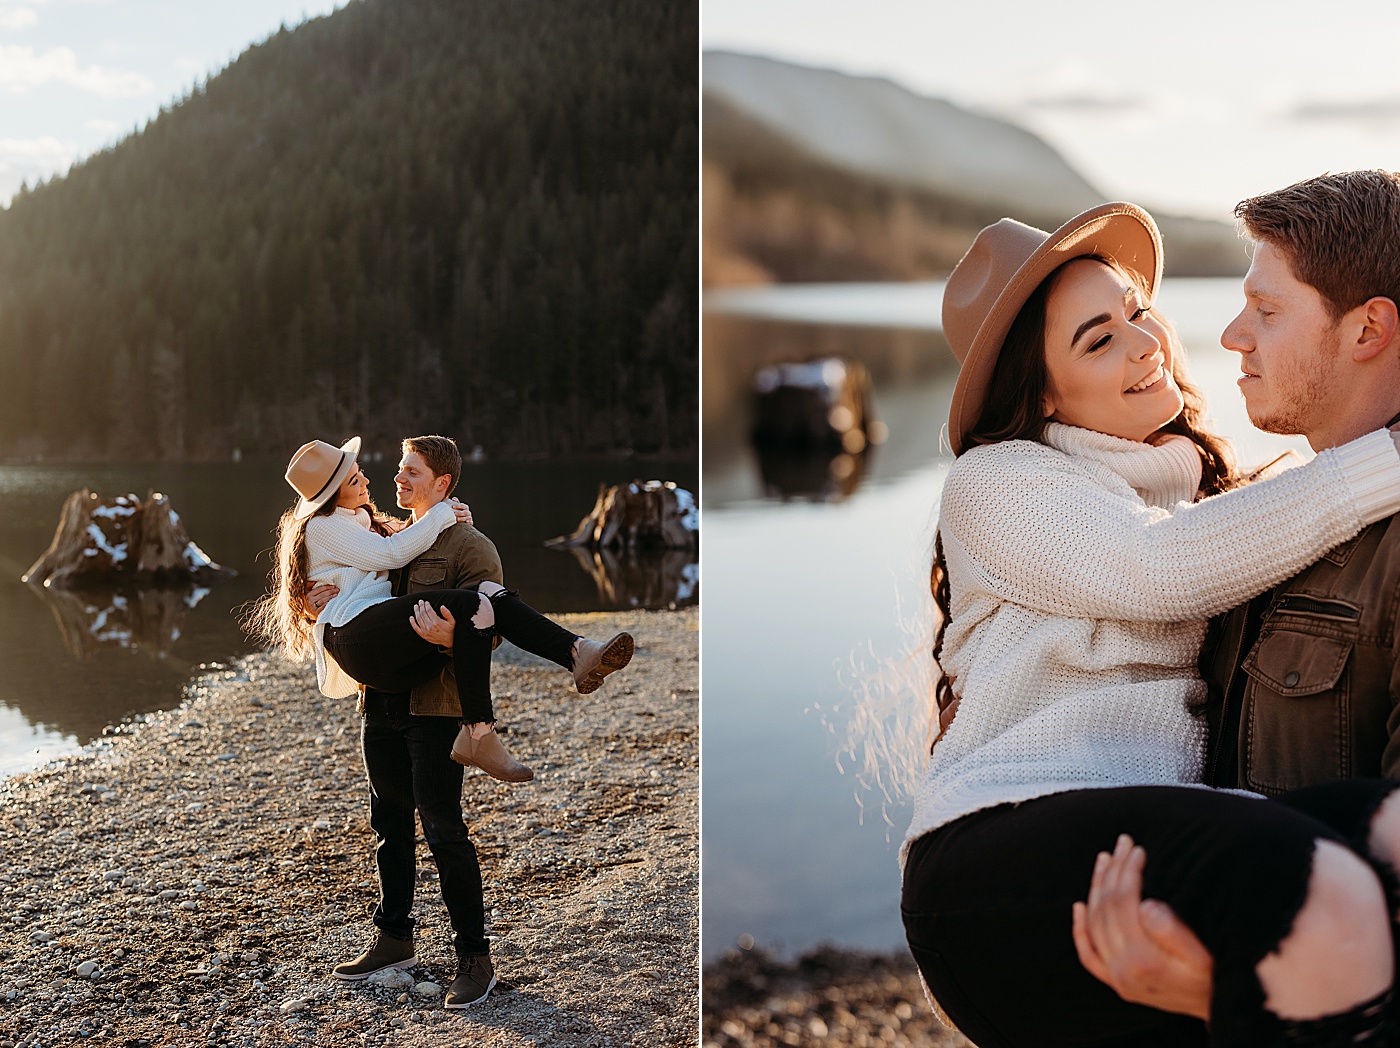 Soon-to-be groom carrying his fiance during engagement photos at Rattlesnake Lake | Megan Montalvo Photography